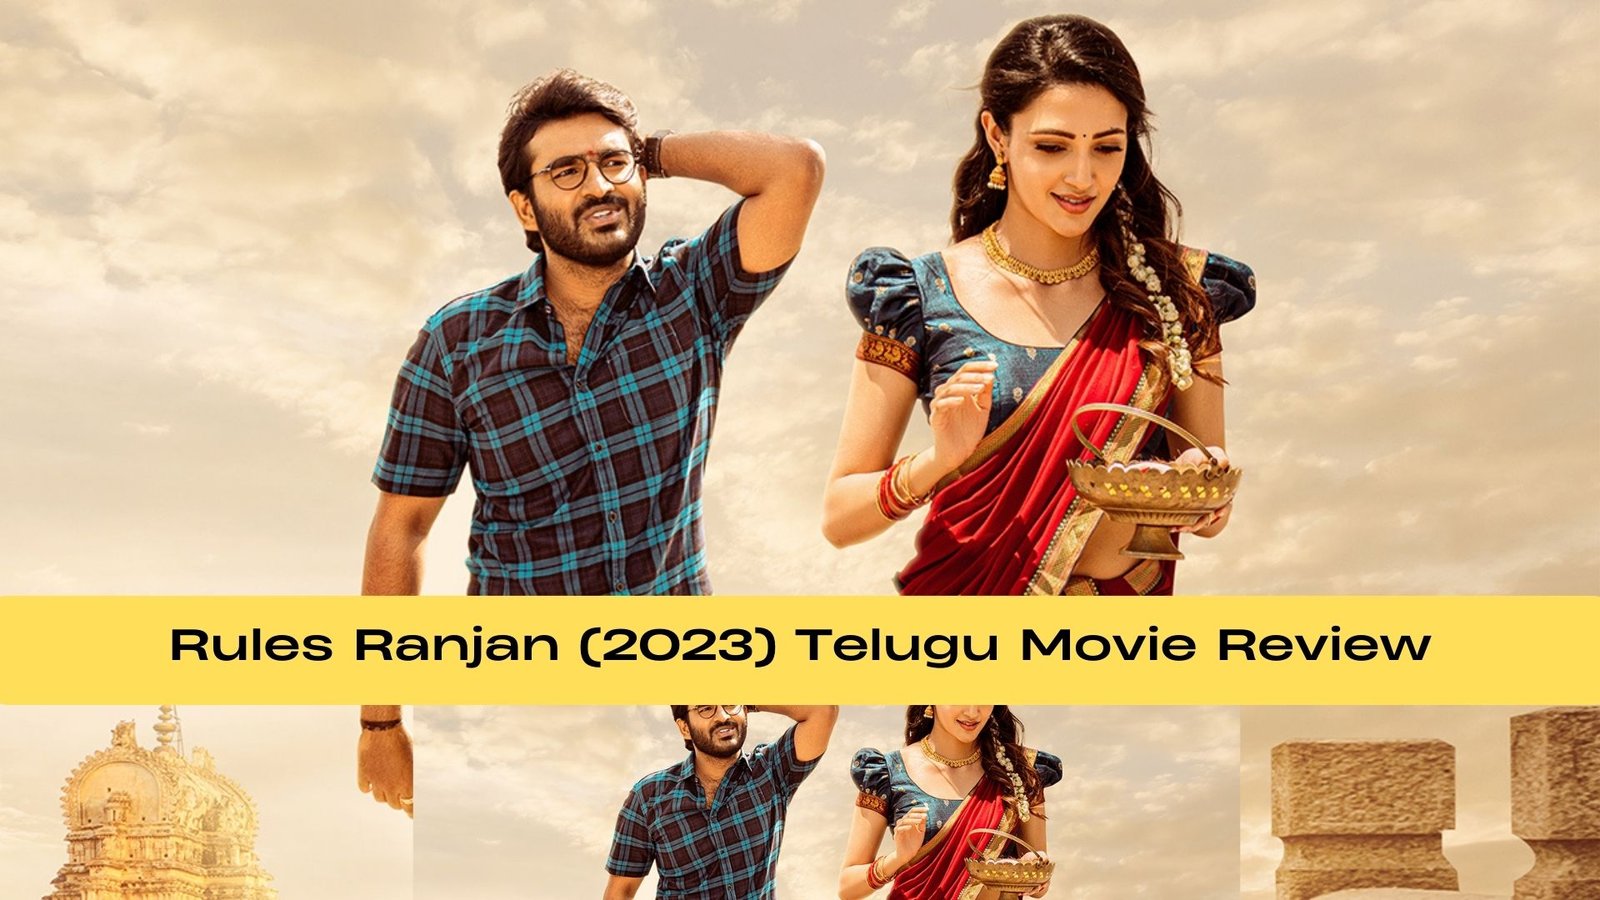 Rules Ranjan (2023) Telugu Movie Review: Full of romance with Comedy